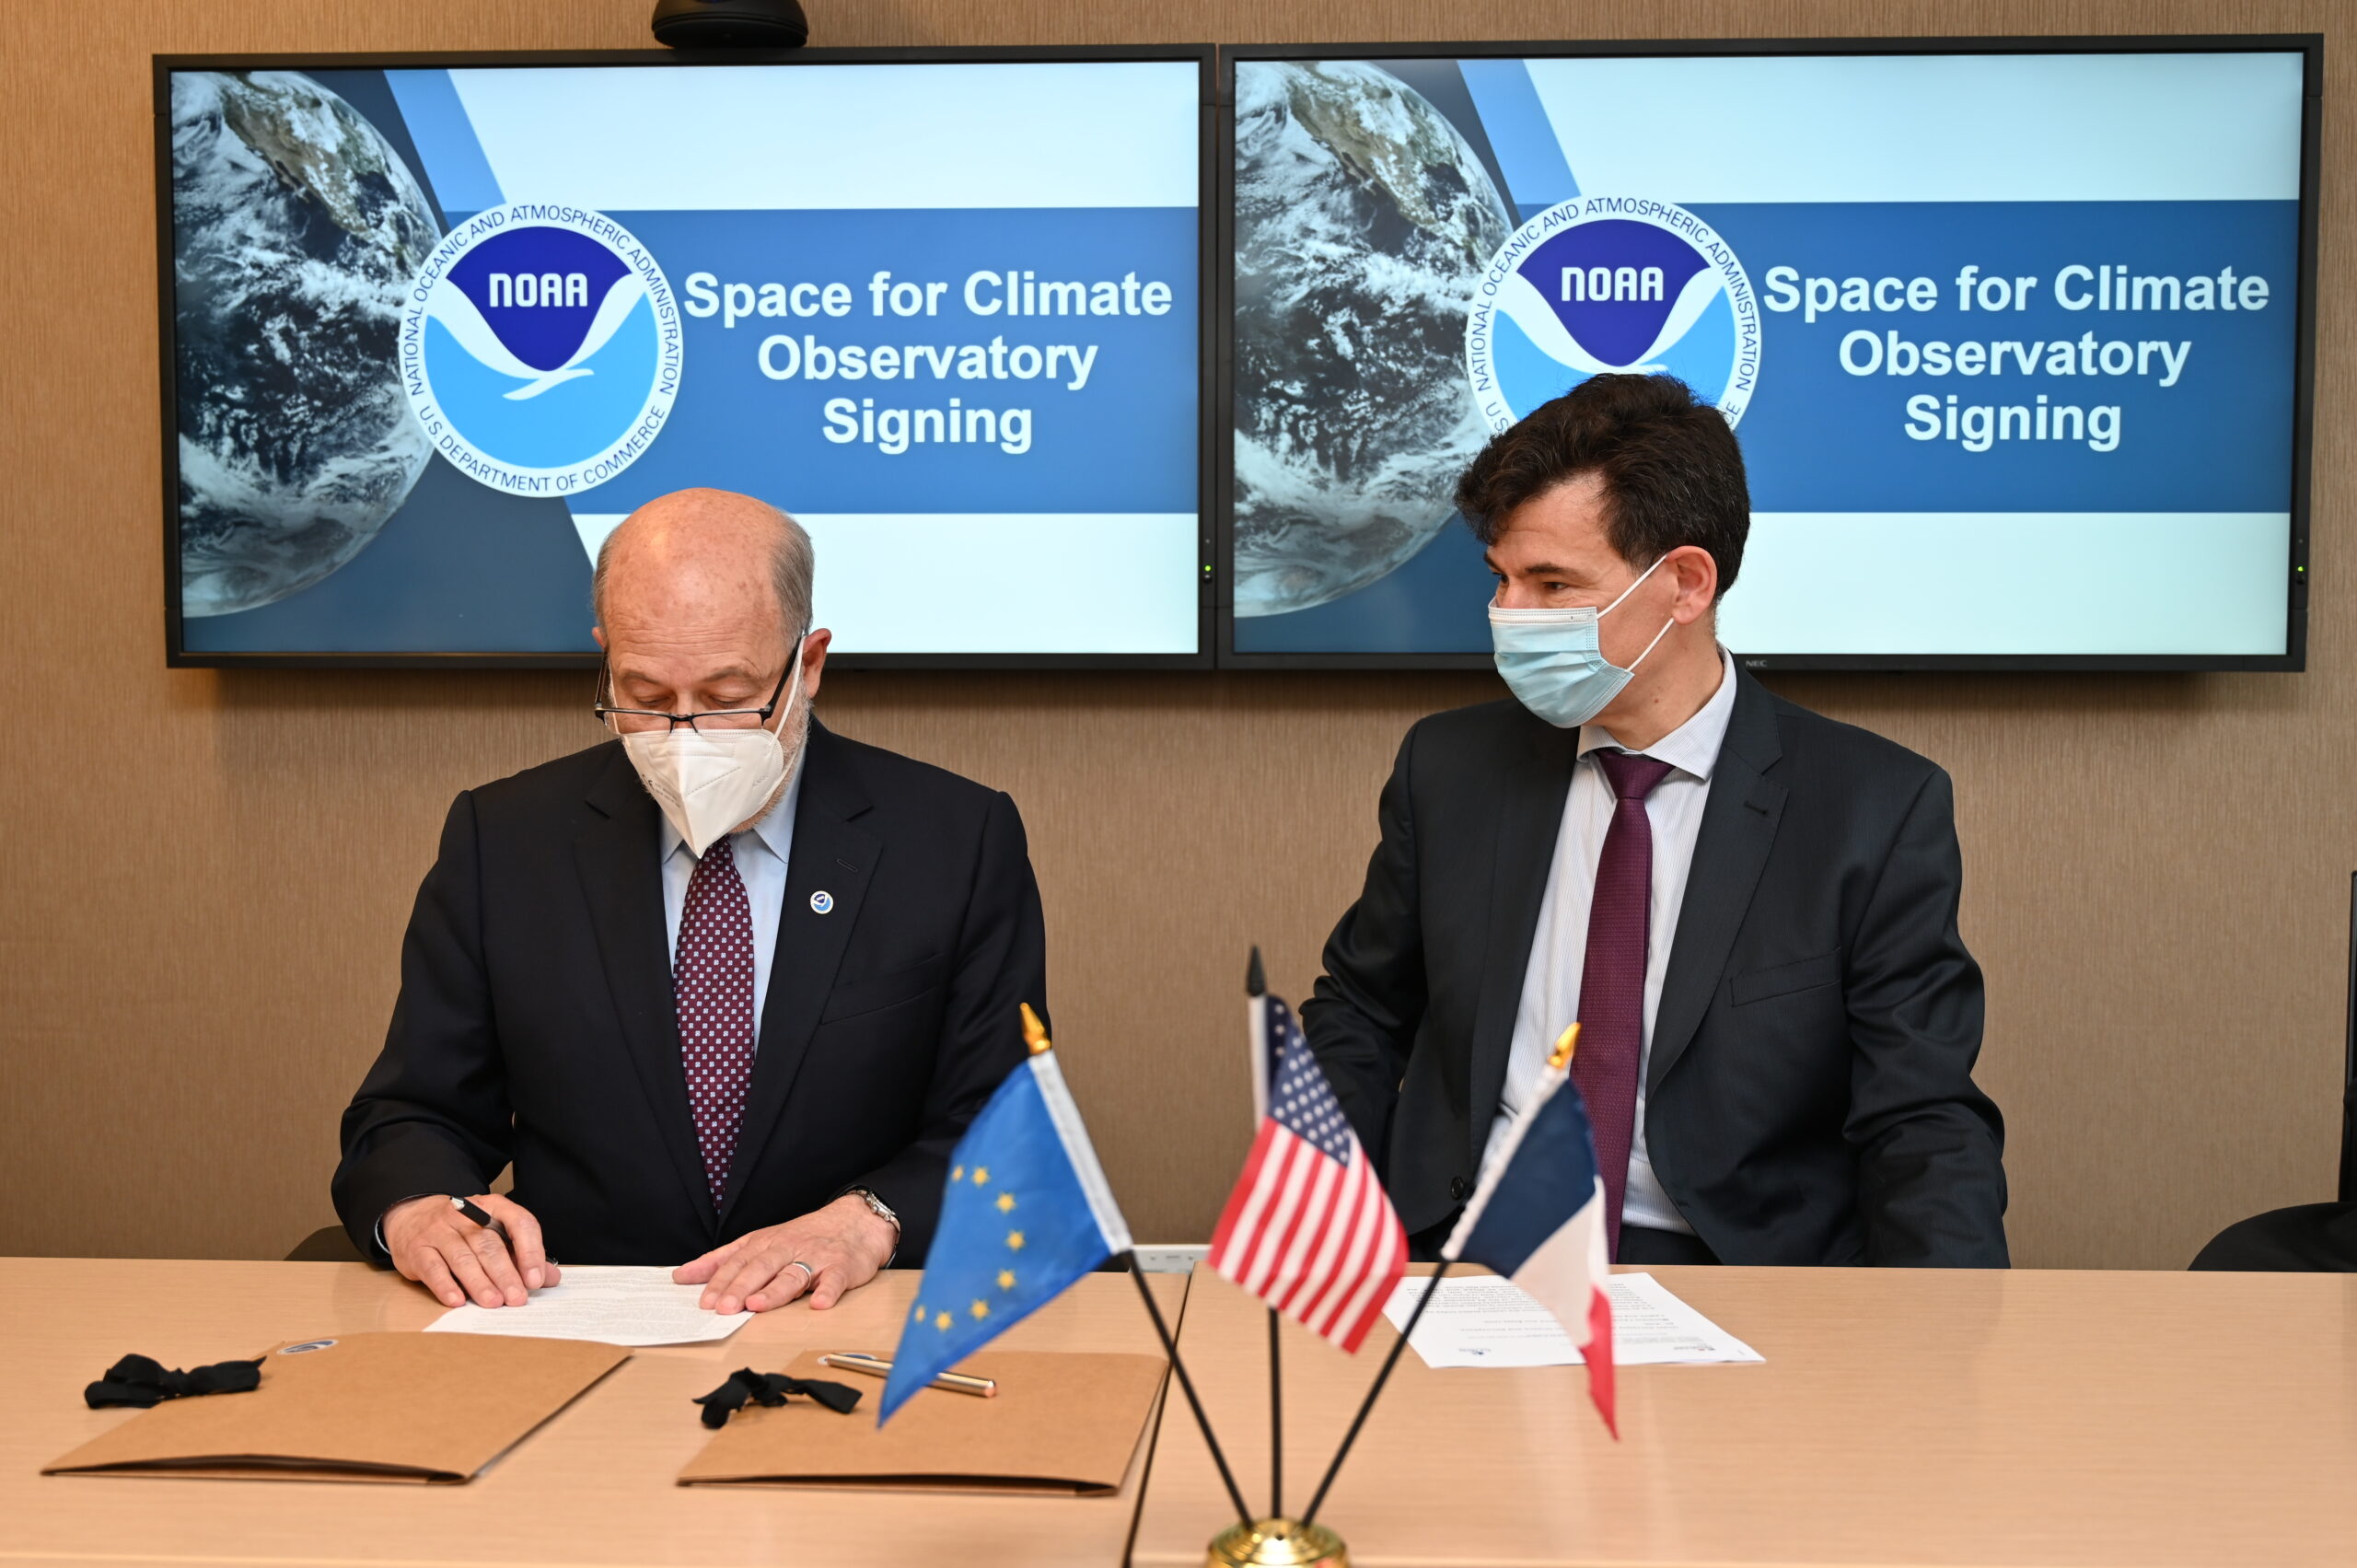 The United States joins the Space for Climate Observatory